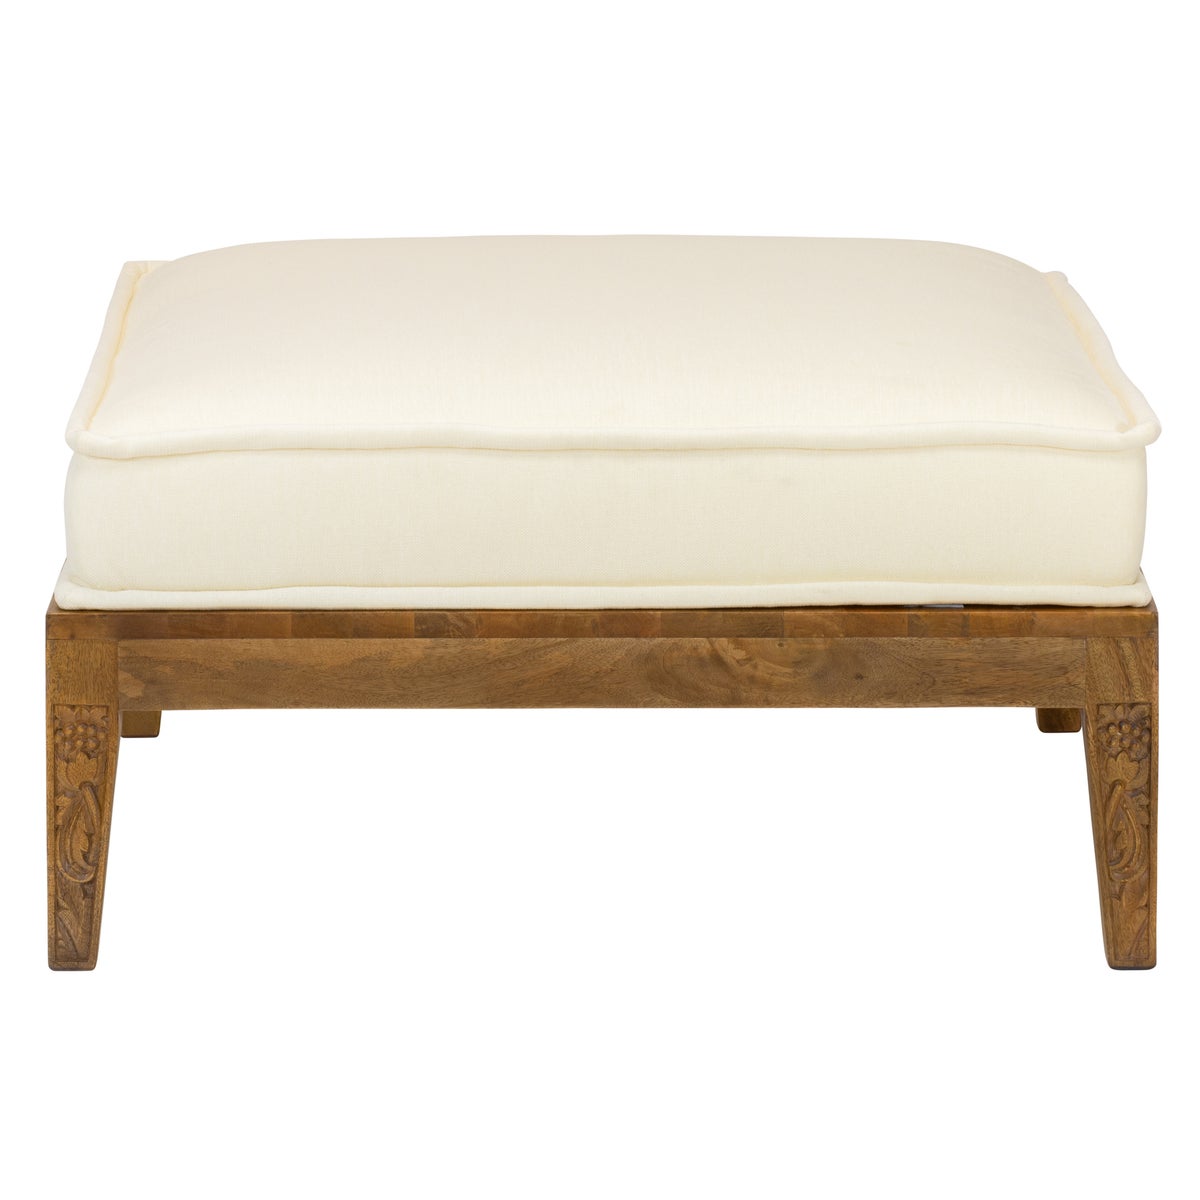 Thistle Ottoman in Natural